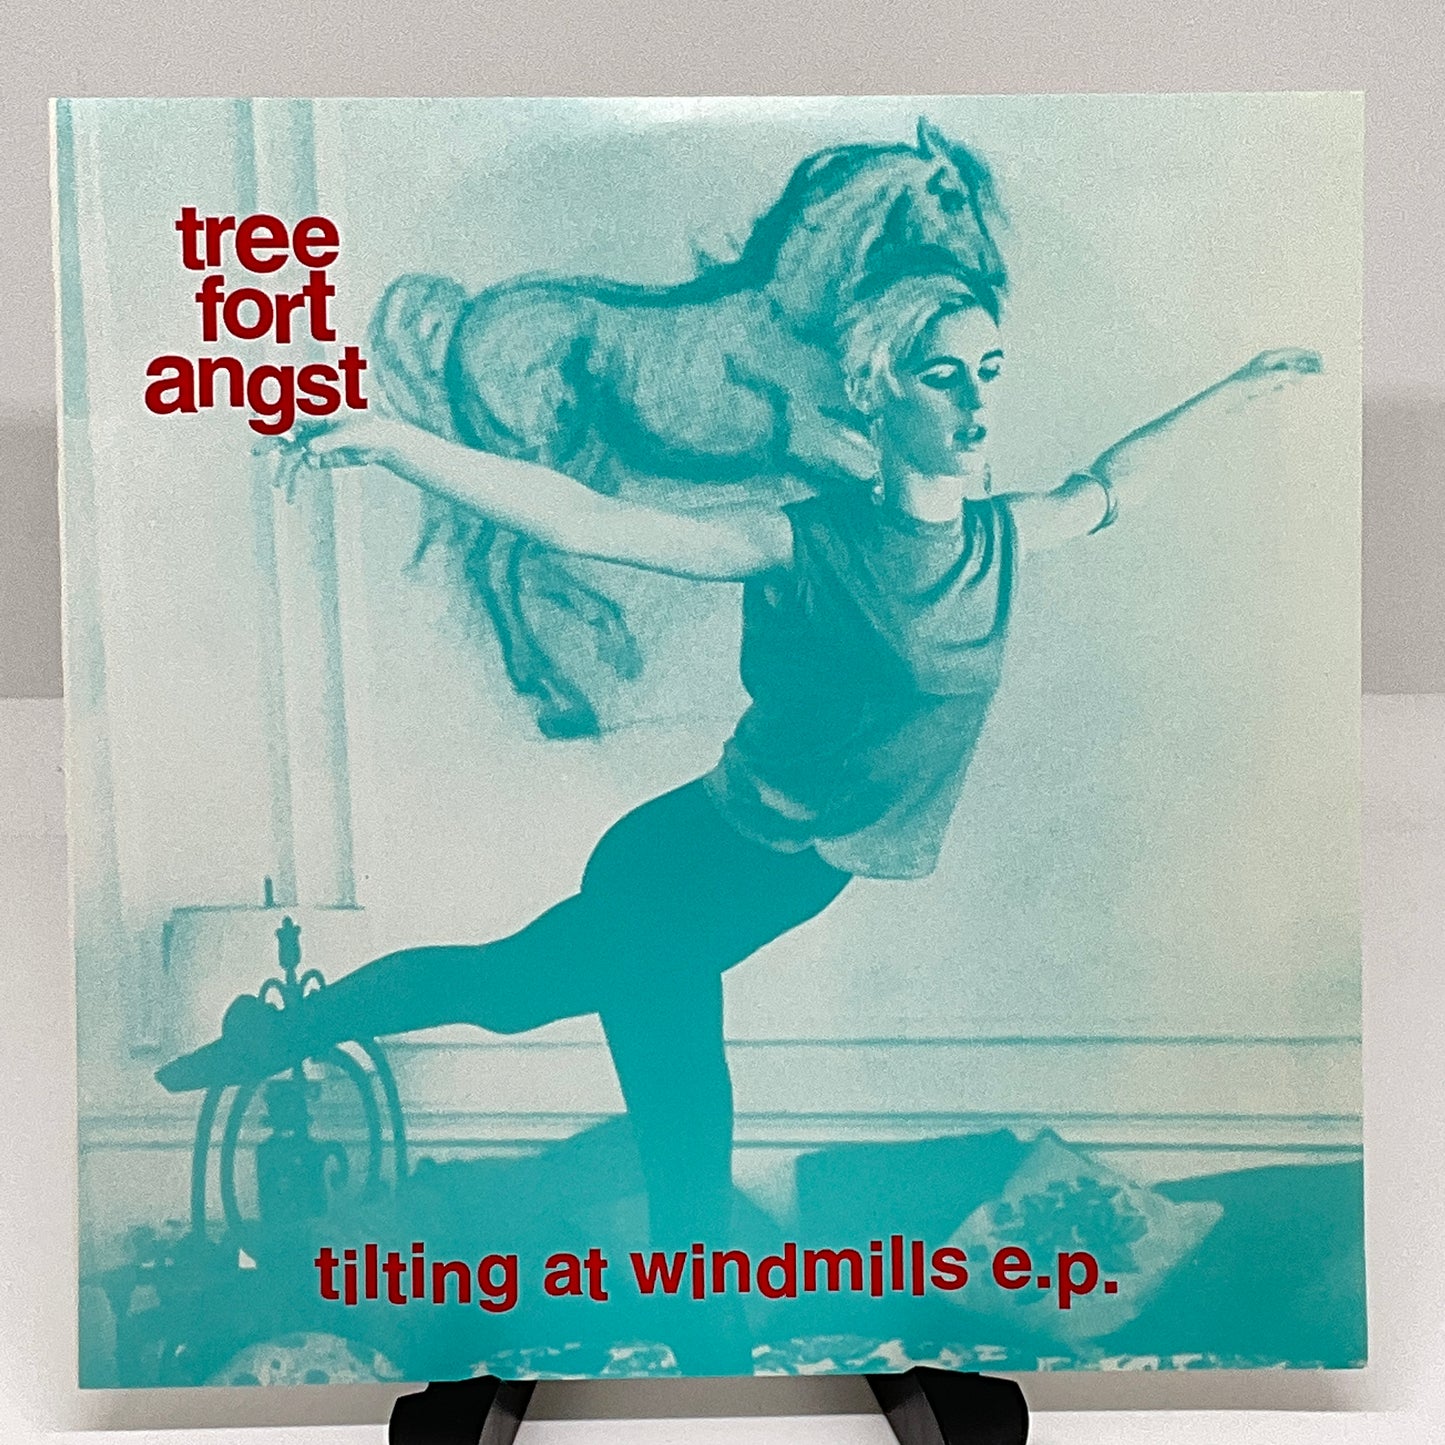 Tree Fort Angst｜Tilting At Windmills E.P.